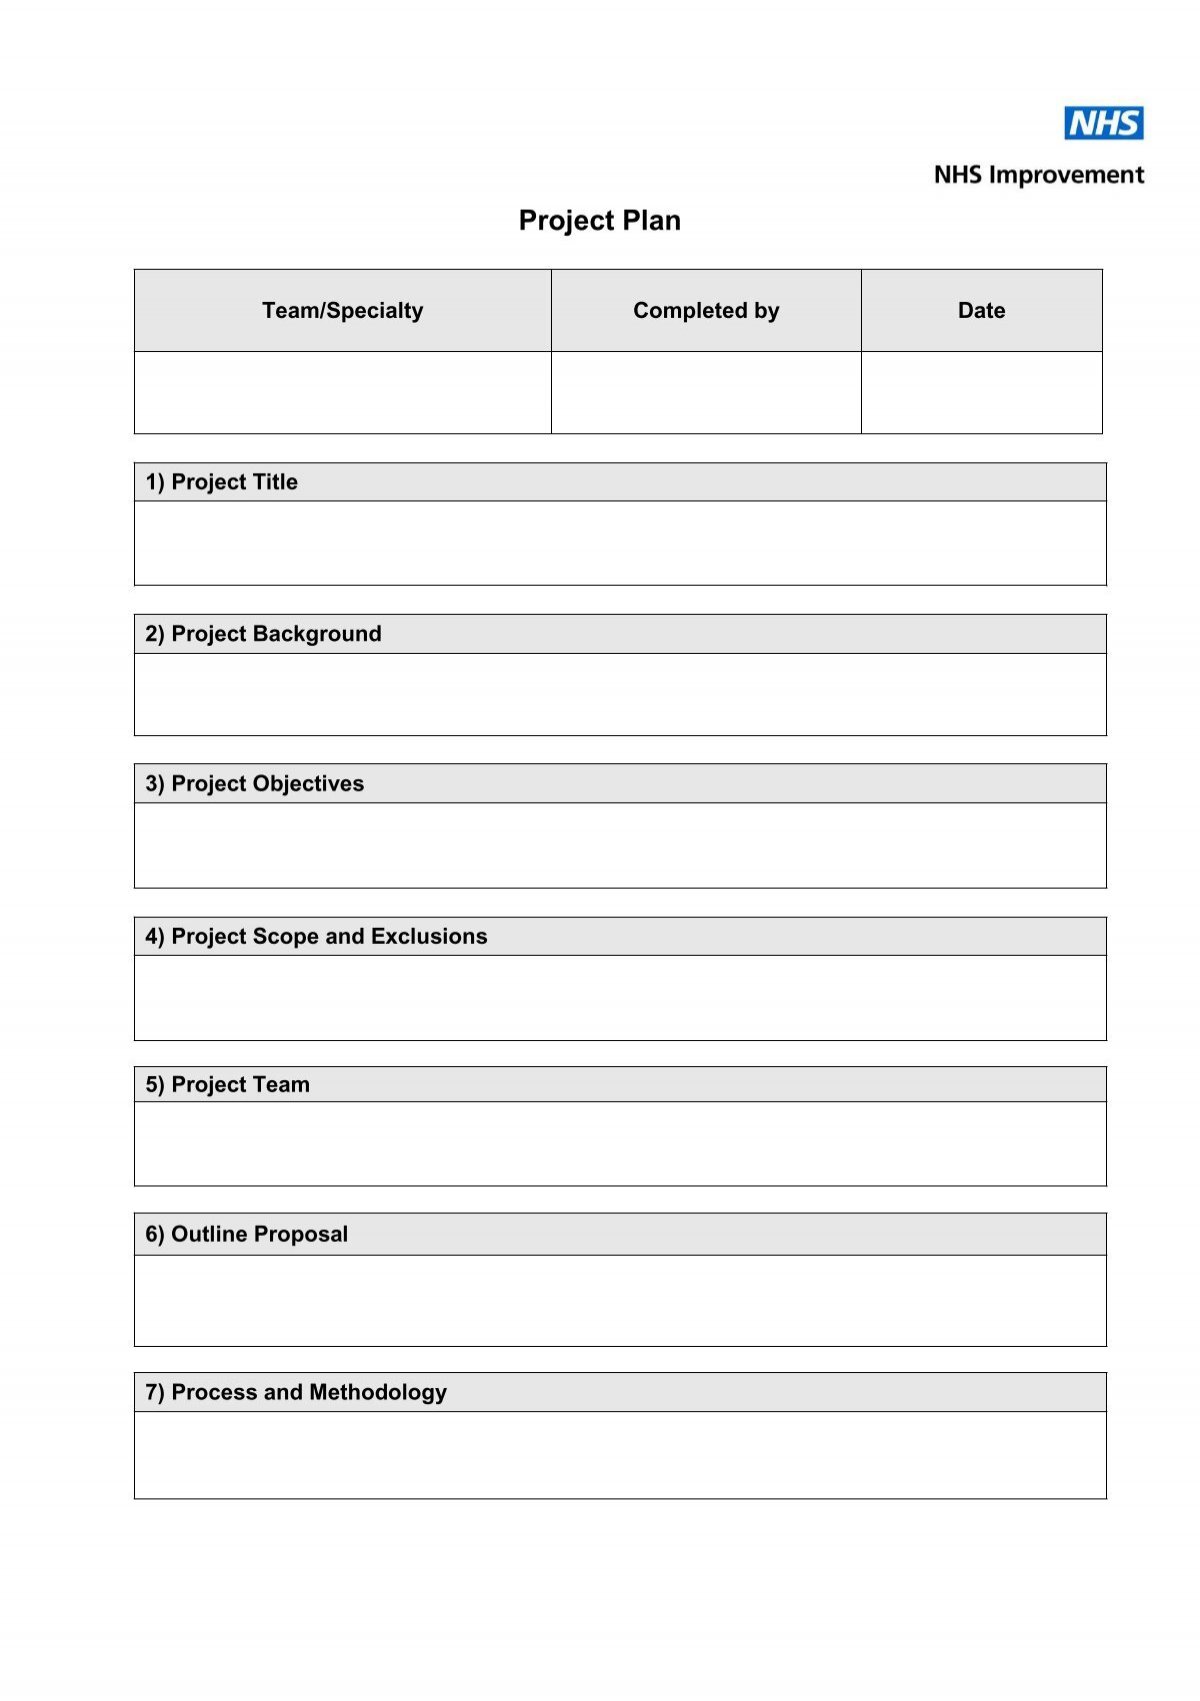 Project Plan Template and guide notes